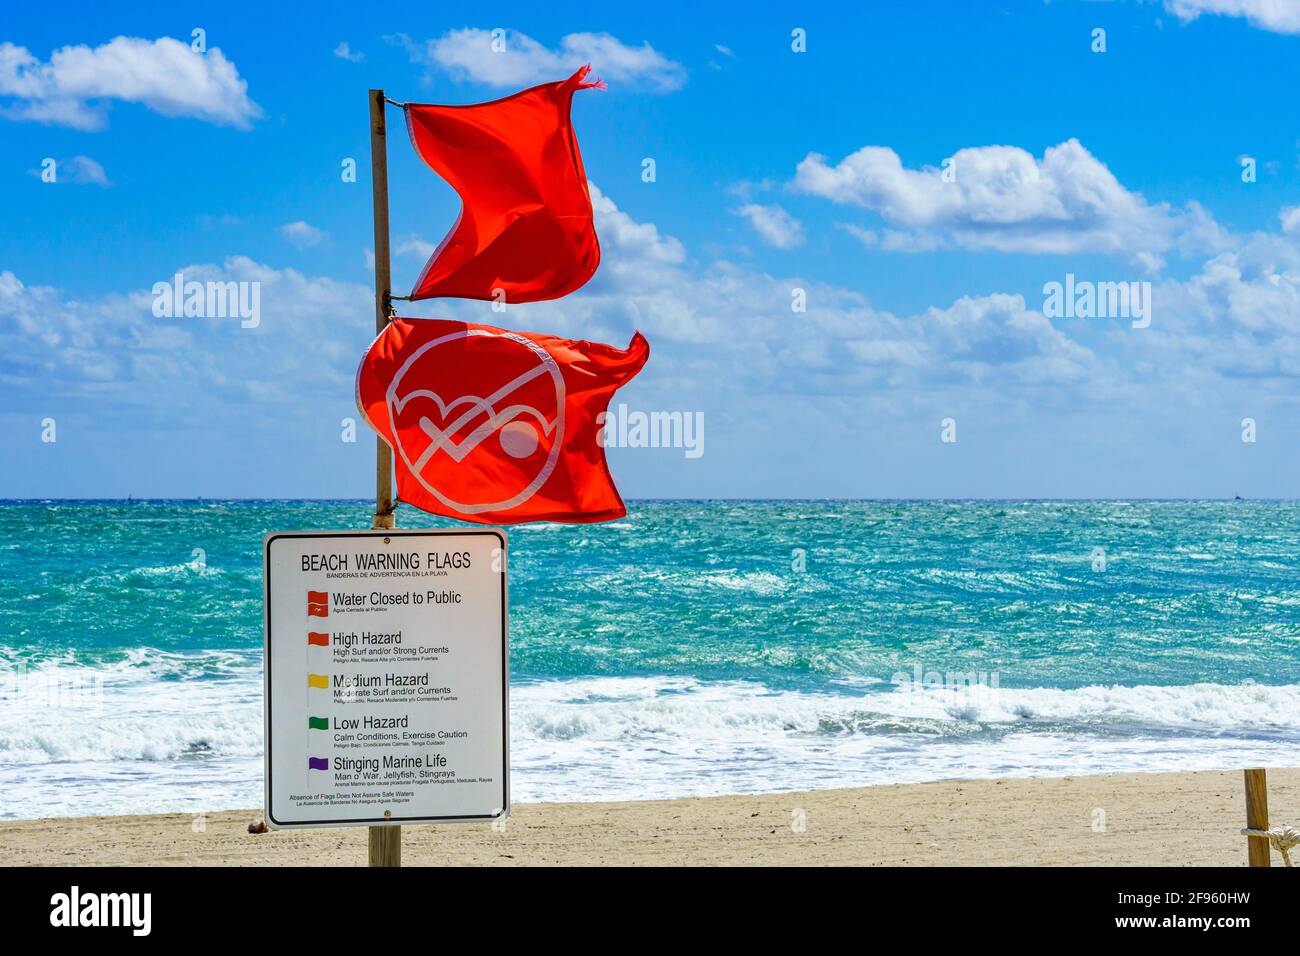 Water Closed to Public red warning flags and informational sign in front of rough, choppy ocean - Hollywood, Florida, USA Stock Photo